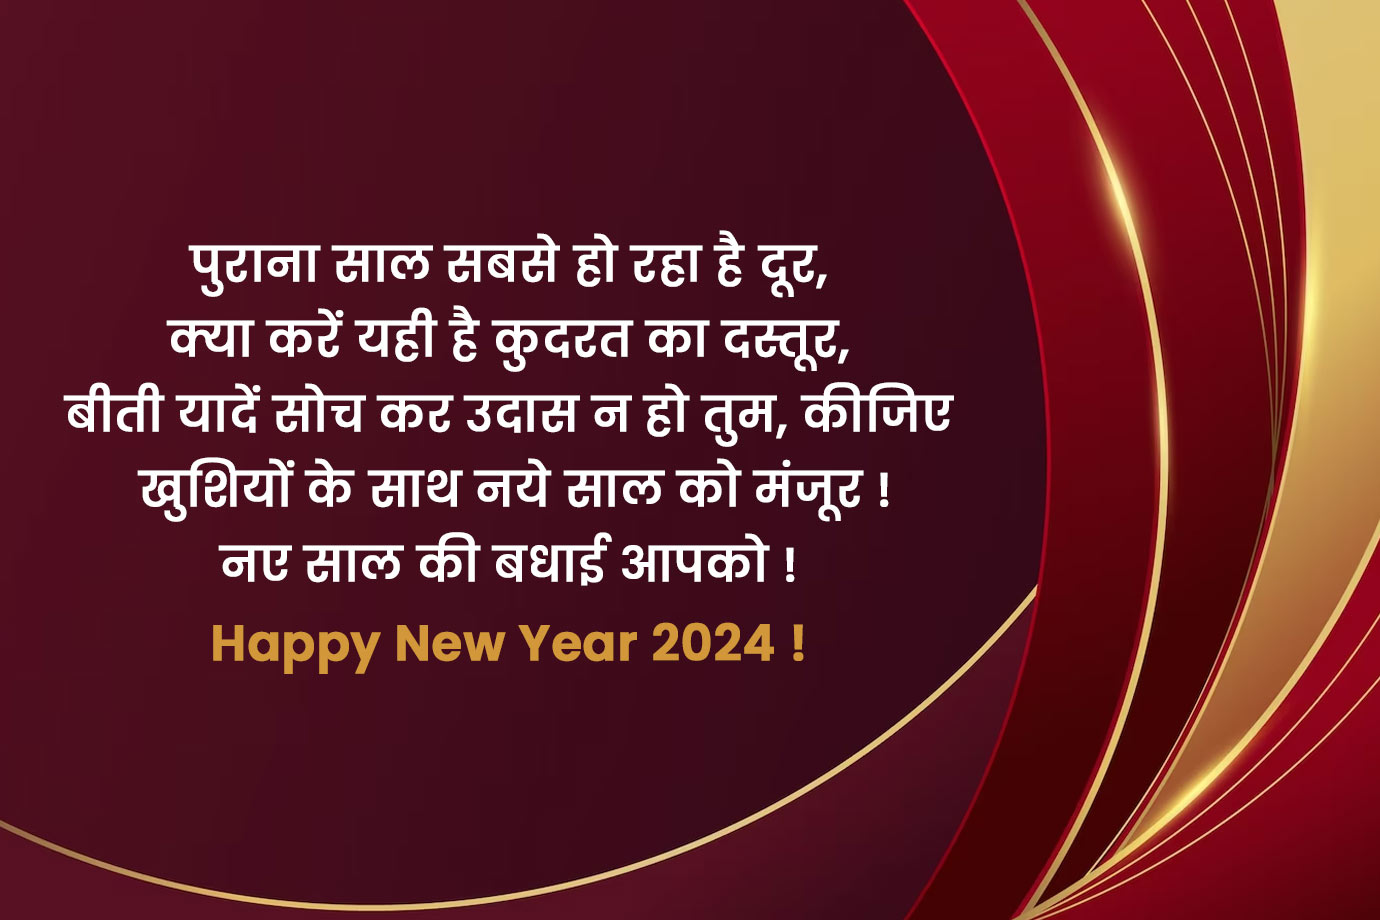 Happy New Year Message in Hindi